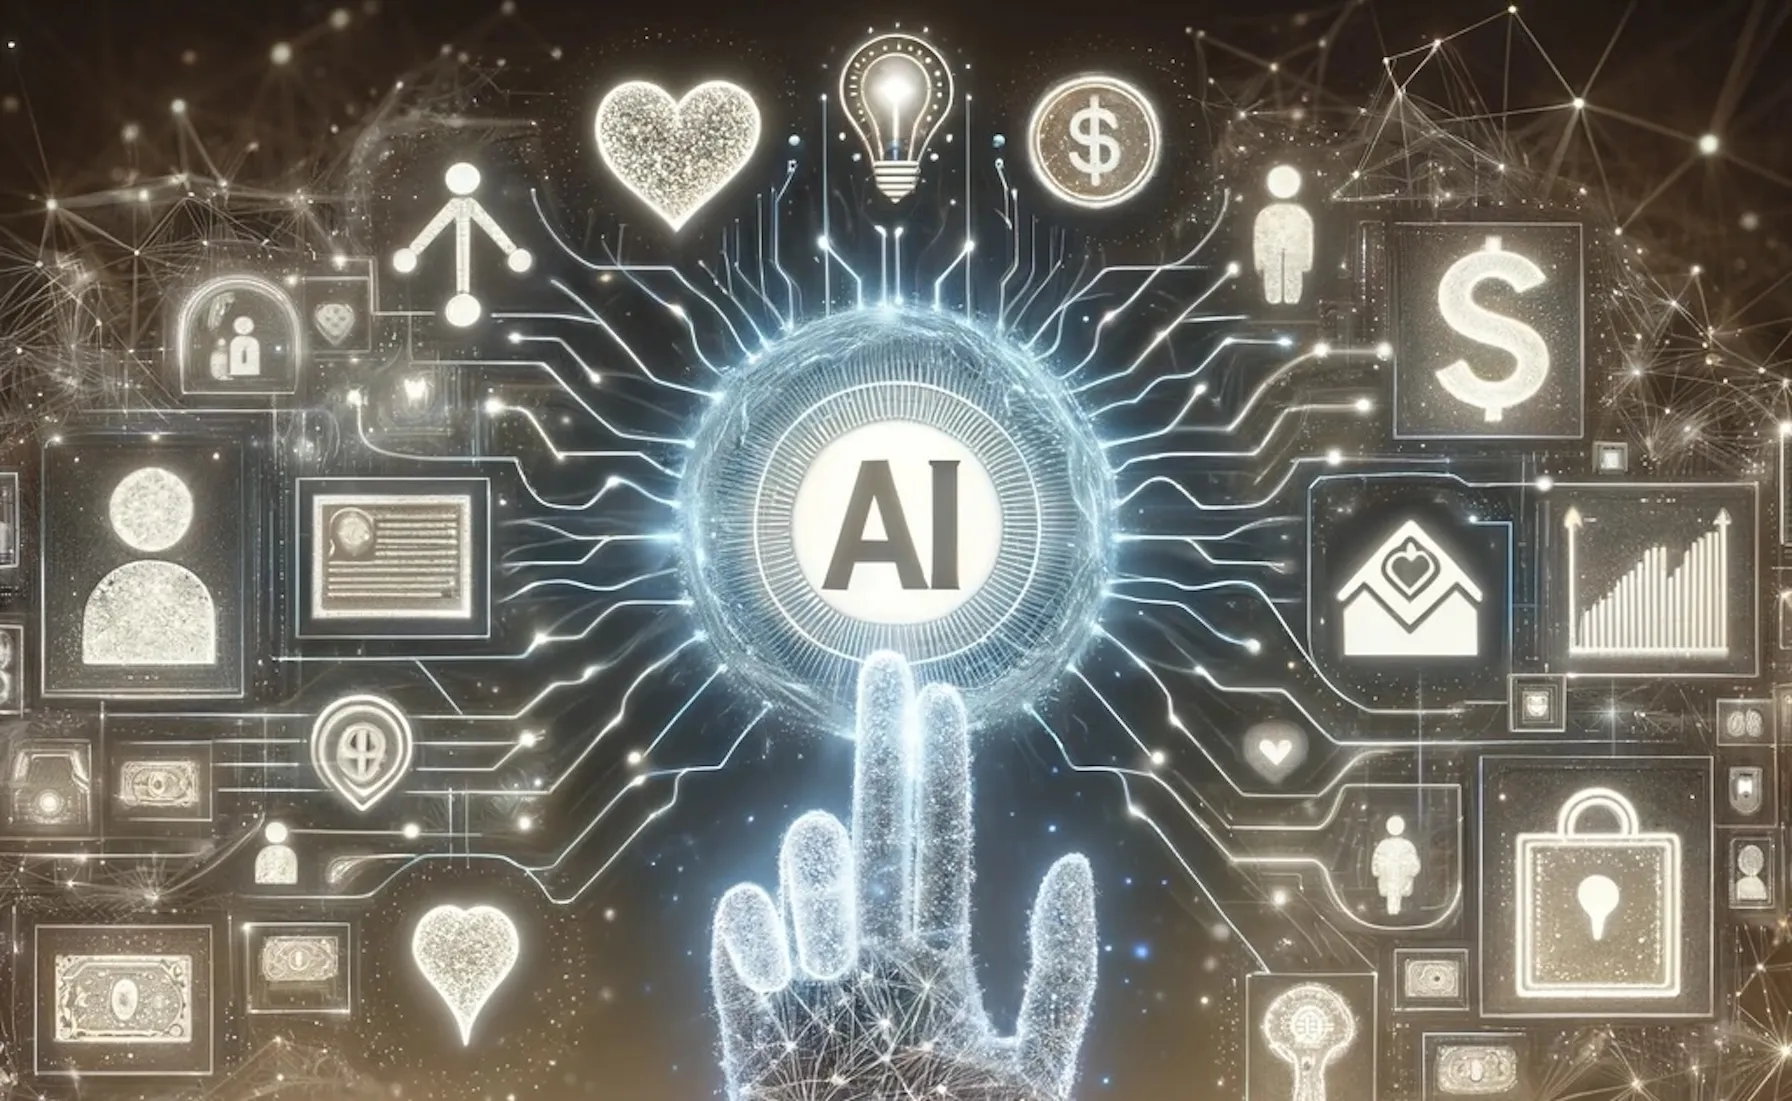 A hand reaches towards an AI symbol, surrounded by icons of finance, innovation, and security.